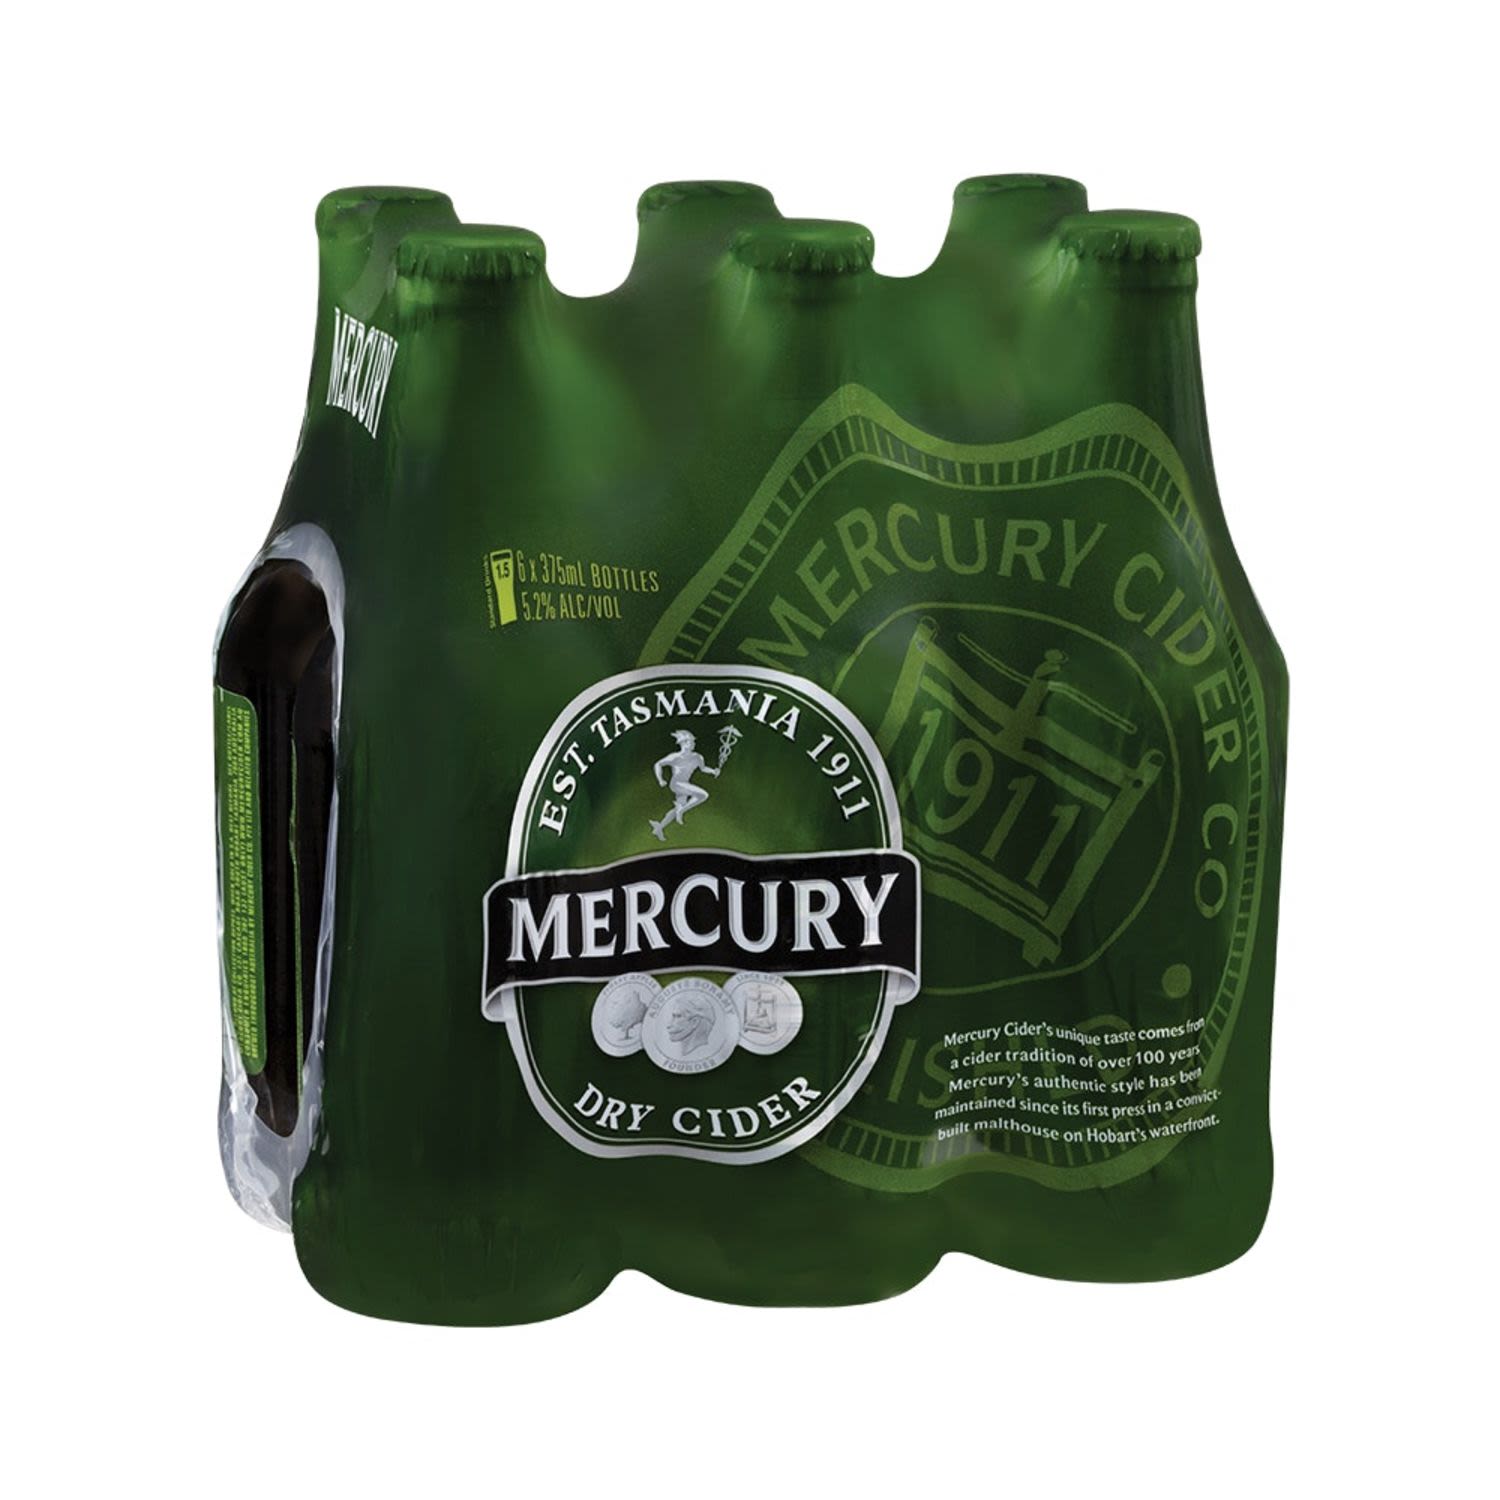 Fresh green apples with clean dry finish and those pure Tasmanian waters show through on the palate. Underrated dry Cider from the apple aisle. Drink cold in a big glass.<br /> <br />Alcohol Volume: 5.20%<br /><br />Pack Format: 6 Pack<br /><br />Standard Drinks: 1.5</br /><br />Pack Type: Bottle<br /><br />Country of Origin: Australia<br />